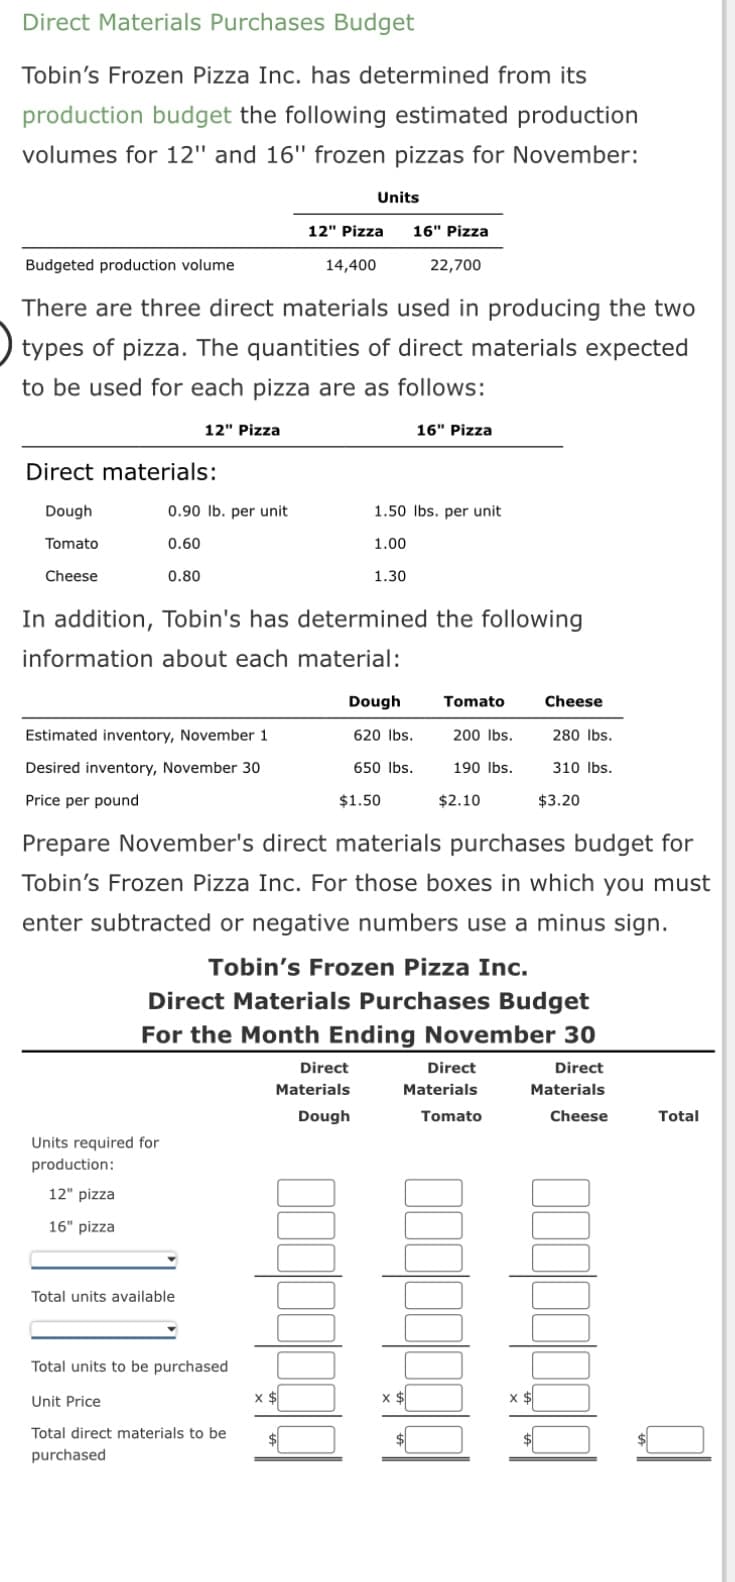 Direct Materials Purchases Budget
Tobin's Frozen Pizza Inc. has determined from its
production budget the following estimated production
volumes for 12" and 16" frozen pizzas for November:
Budgeted production volume
There are three direct materials used in producing the two
types of pizza. The quantities of direct materials expected
to be used for each pizza are as follows:
Direct materials:
Dough
Tomato
Cheese
12" Pizza
0.90 lb. per unit
0.60
0.80
Estimated inventory, November 1
Desired inventory, November 30
Price per pound
Units required for
production:
12" pizza
16" pizza
Total units available
In addition, Tobin's has determined the following
information about each material:
Units
12" Pizza 16" Pizza
22,700
14,400
Total units to be purchased
Unit Price
Total direct materials to be
purchased
x $
1.50 lbs. per unit
1.00
1.30
Dough
620 lbs.
650 lbs.
Direct
Materials
Dough
$1.50
16" Pizza
Tomato
Prepare November's direct materials purchases budget for
Tobin's Frozen Pizza Inc. For those boxes in which you must
enter subtracted or negative numbers use a minus sign.
200 lbs.
190 lbs.
Tobin's Frozen Pizza Inc.
Direct Materials Purchases Budget
For the Month Ending November 30
Direct
Materials
Cheese
x $
$2.10
Direct
Materials
Tomato
Cheese
280 lbs.
x $
310 lbs.
$3.20
Total